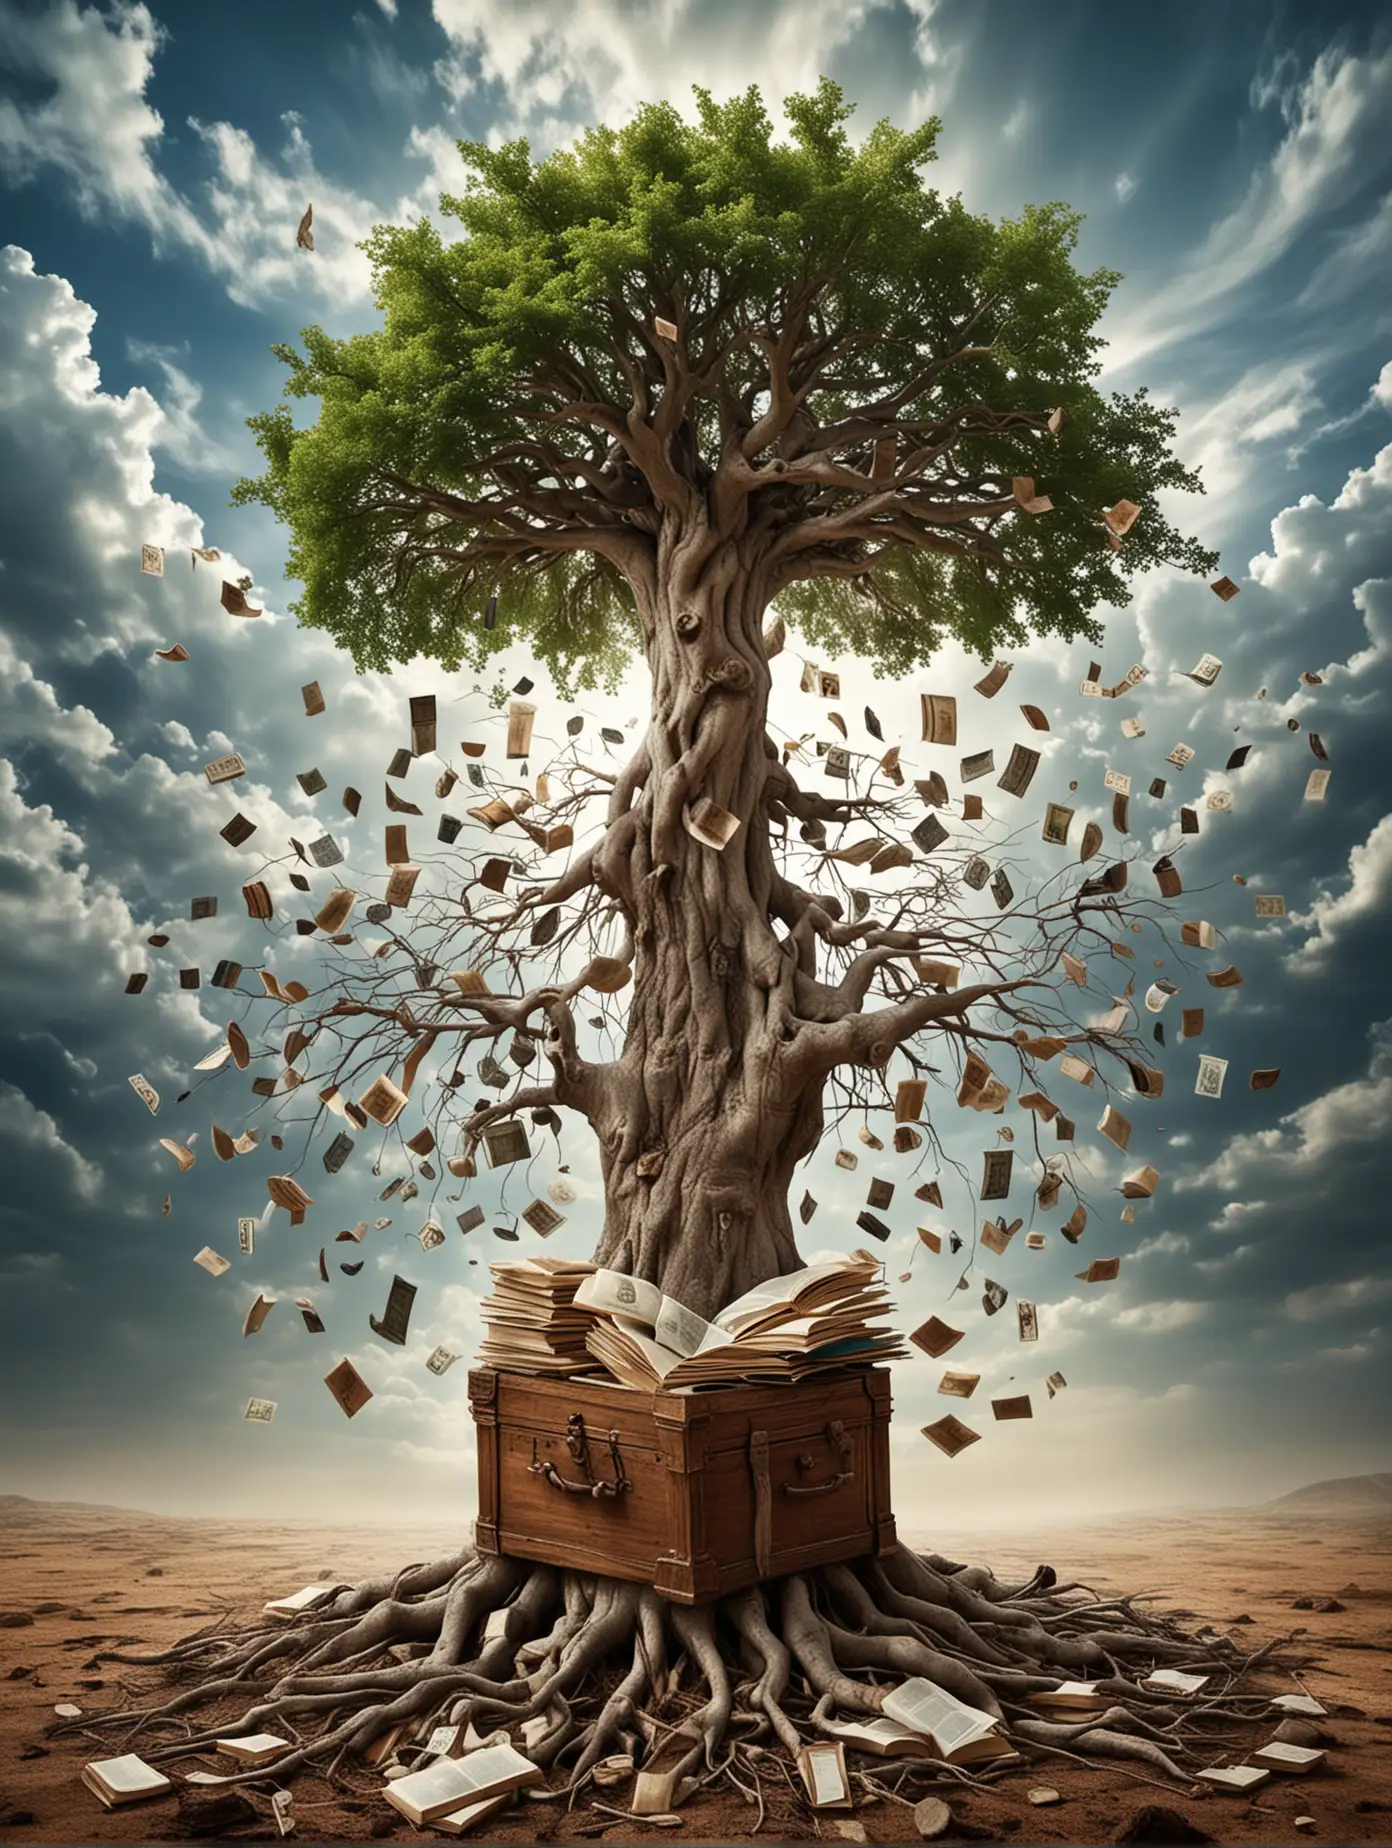 Majestic-Tree-with-Roots-Connecting-Earth-and-Sky-Angels-and-Treasure-Chest